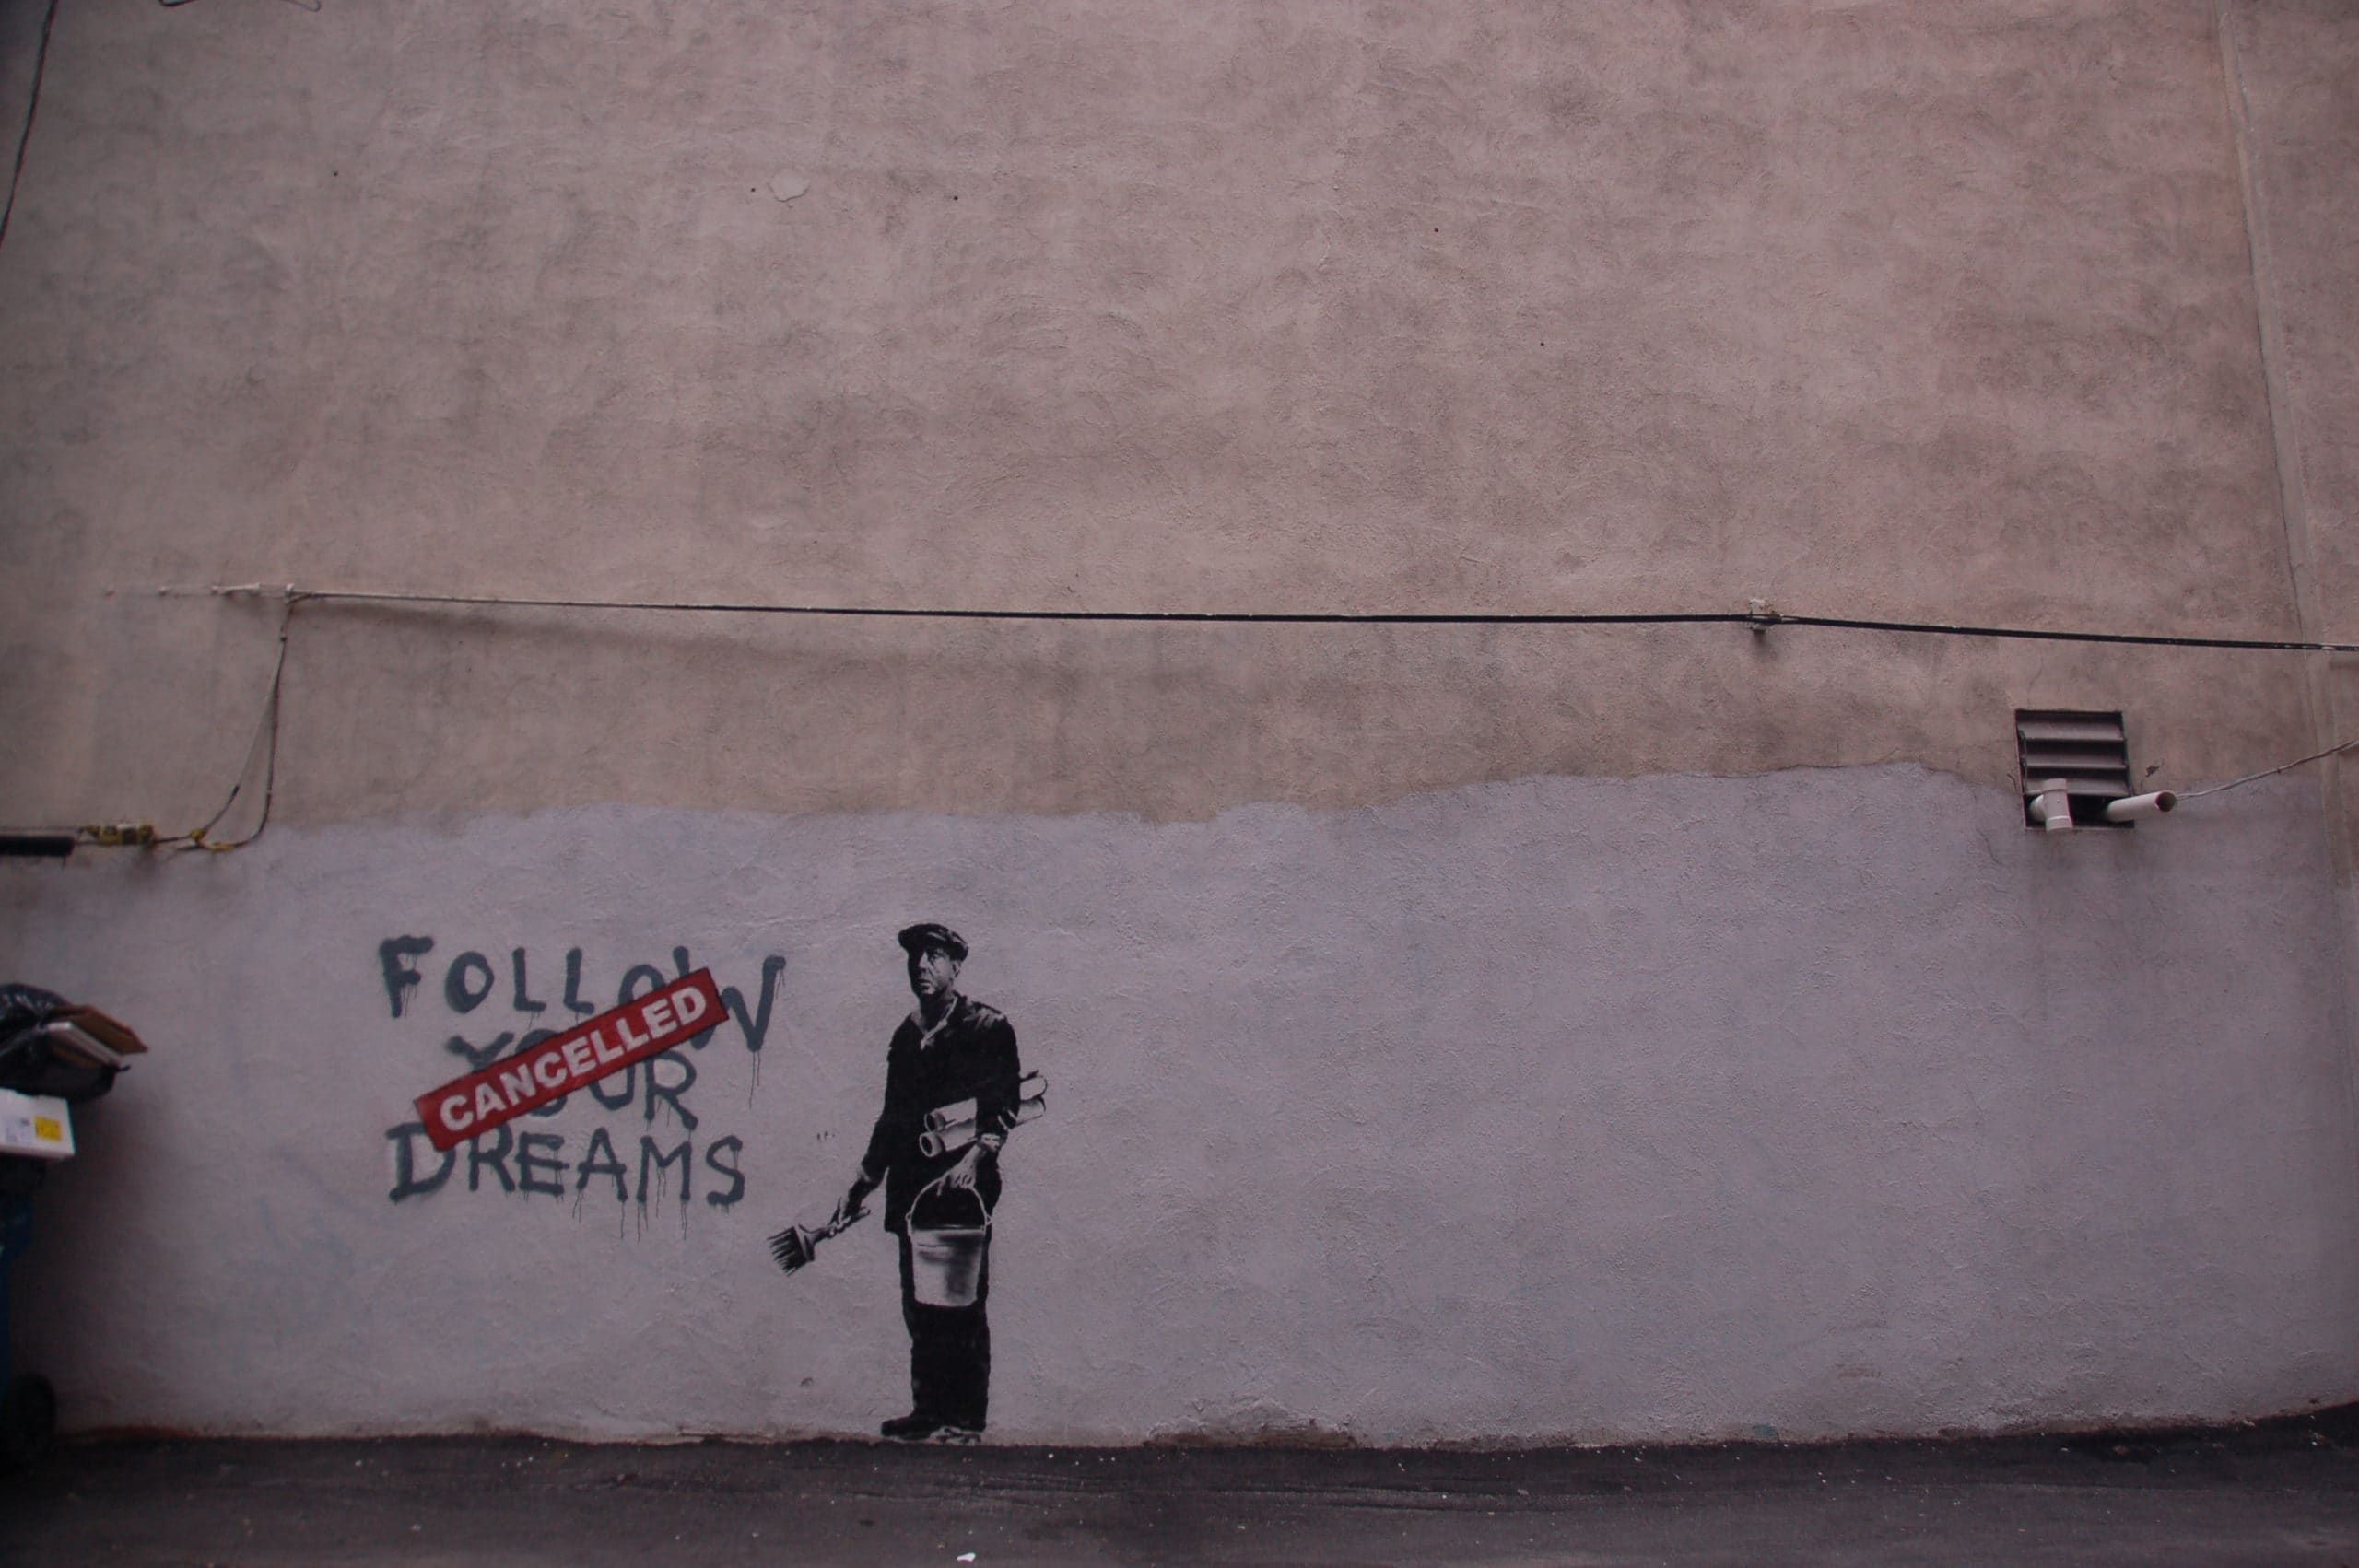 A grafiti Banksy style cancelling a follow your dream one